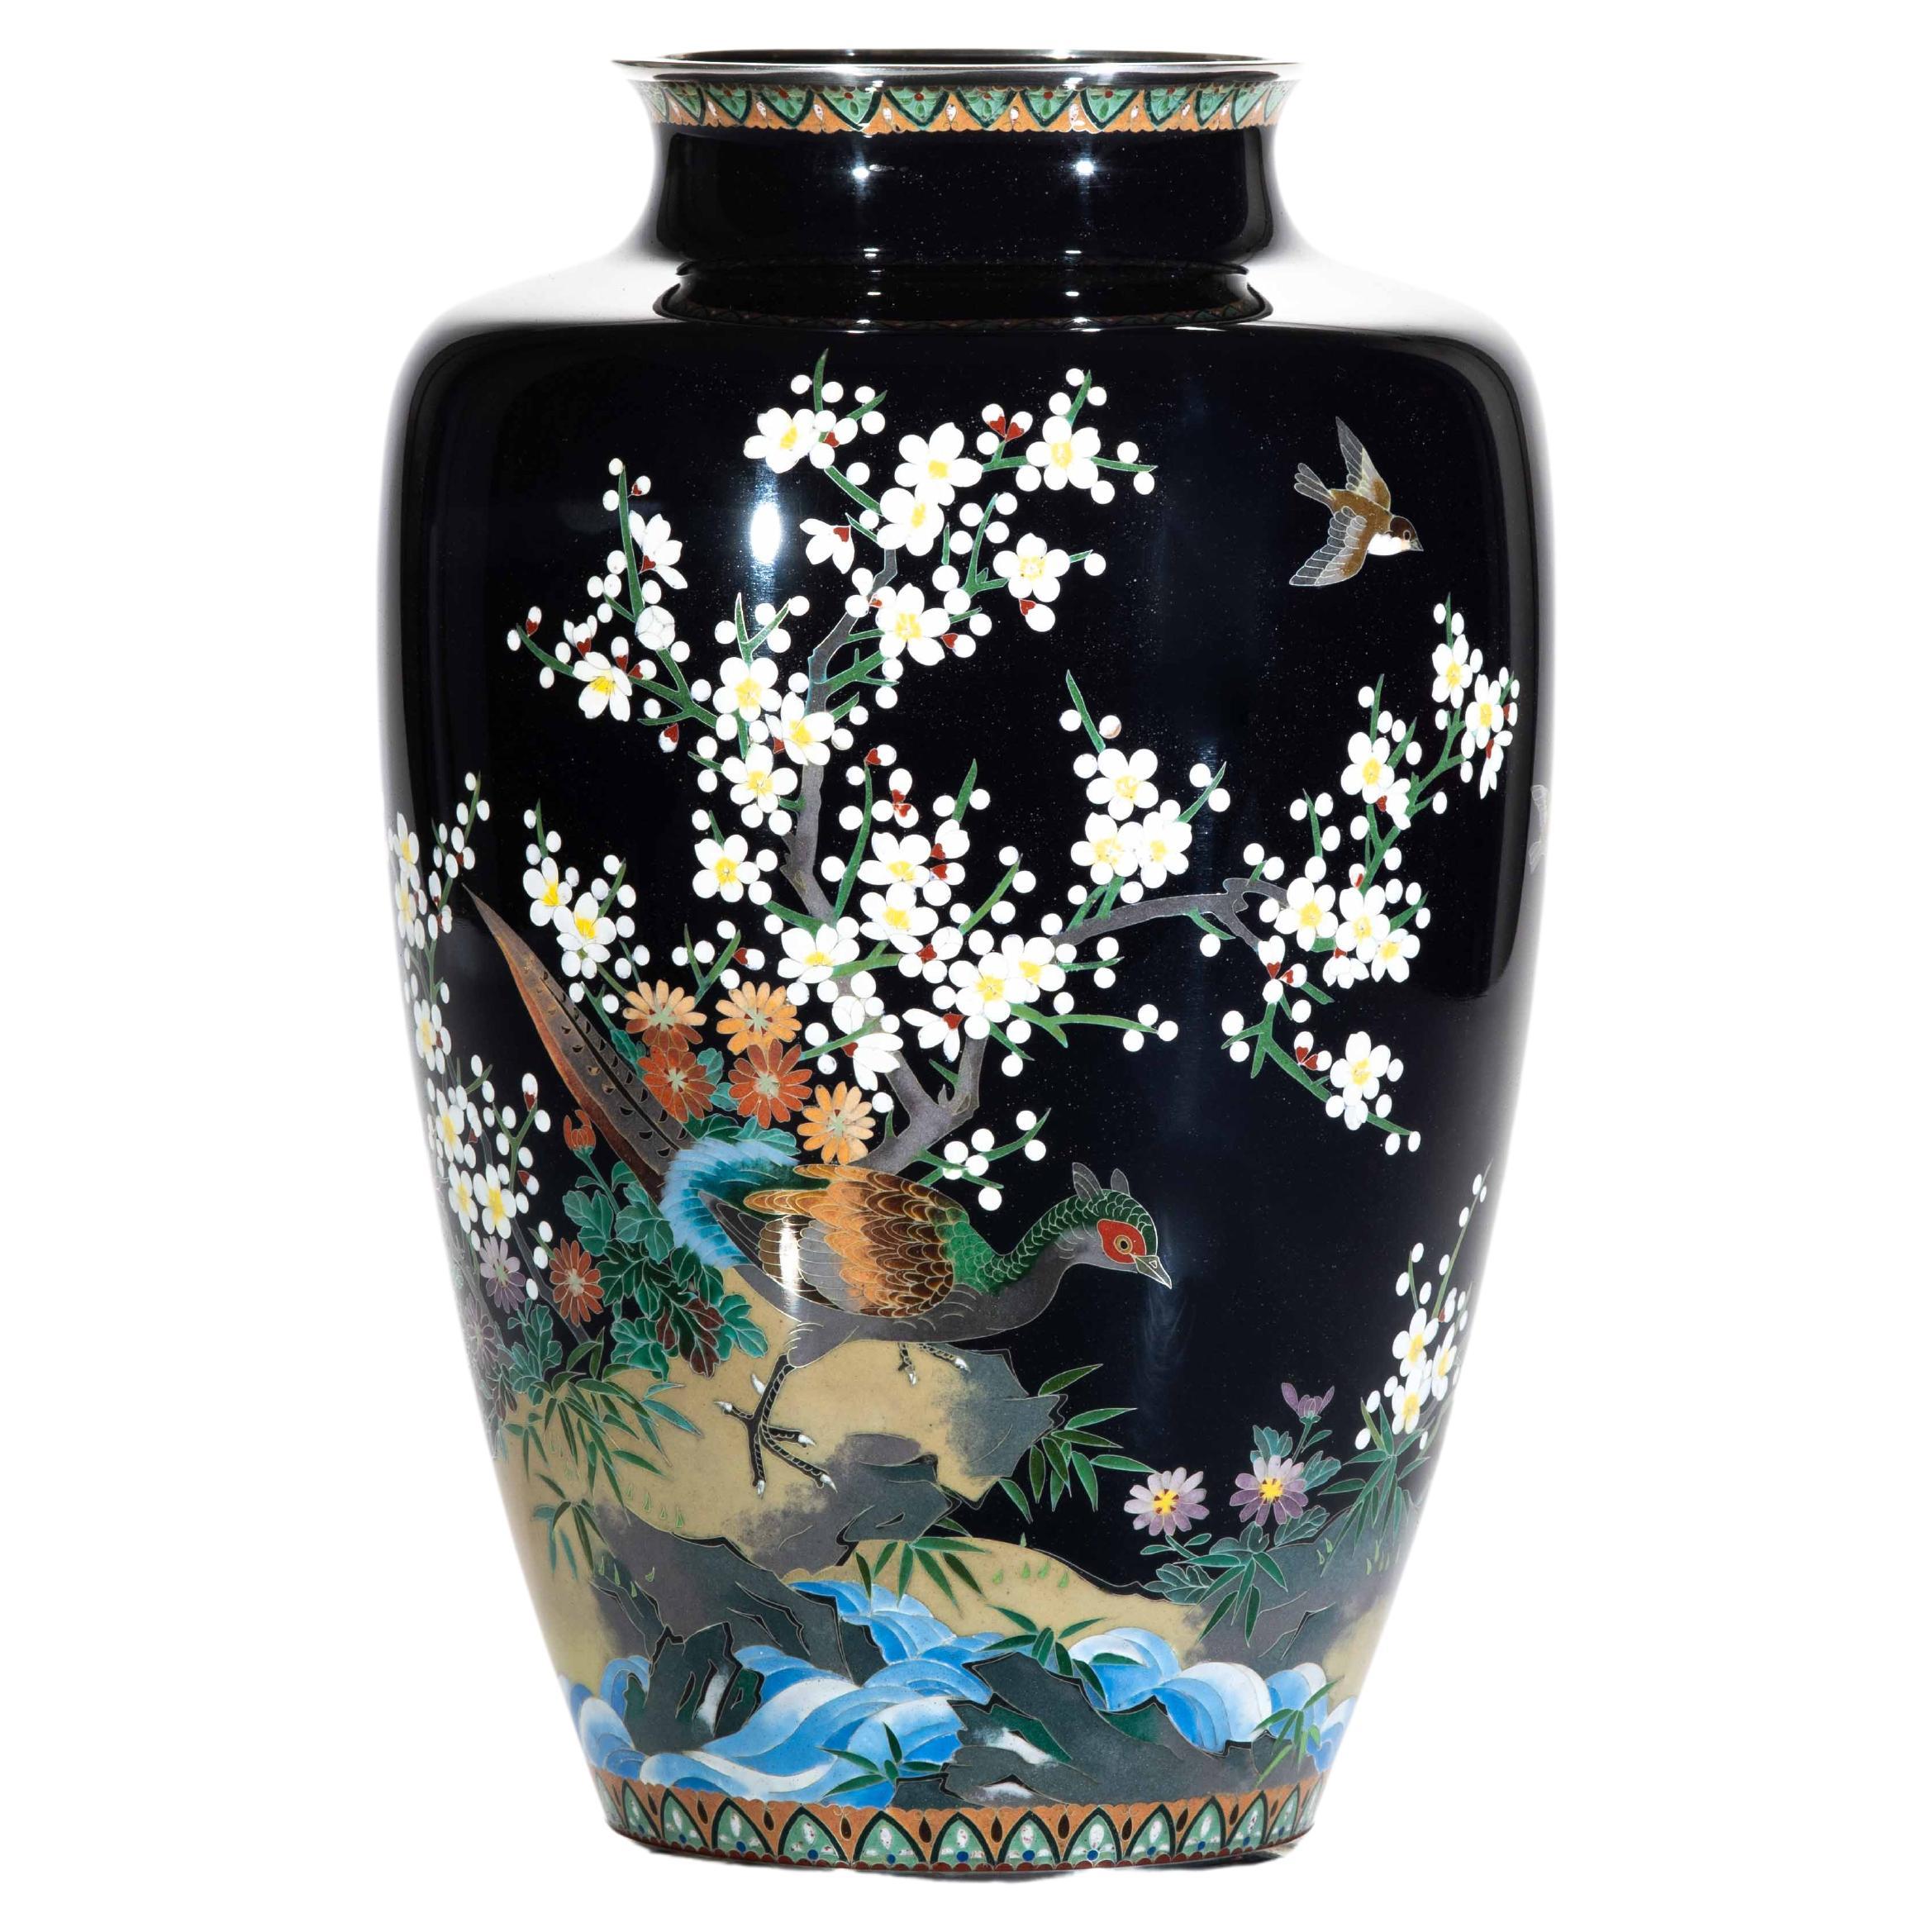 A cloisonné vase depicting a pheasant surrounded by blooming cherry For Sale